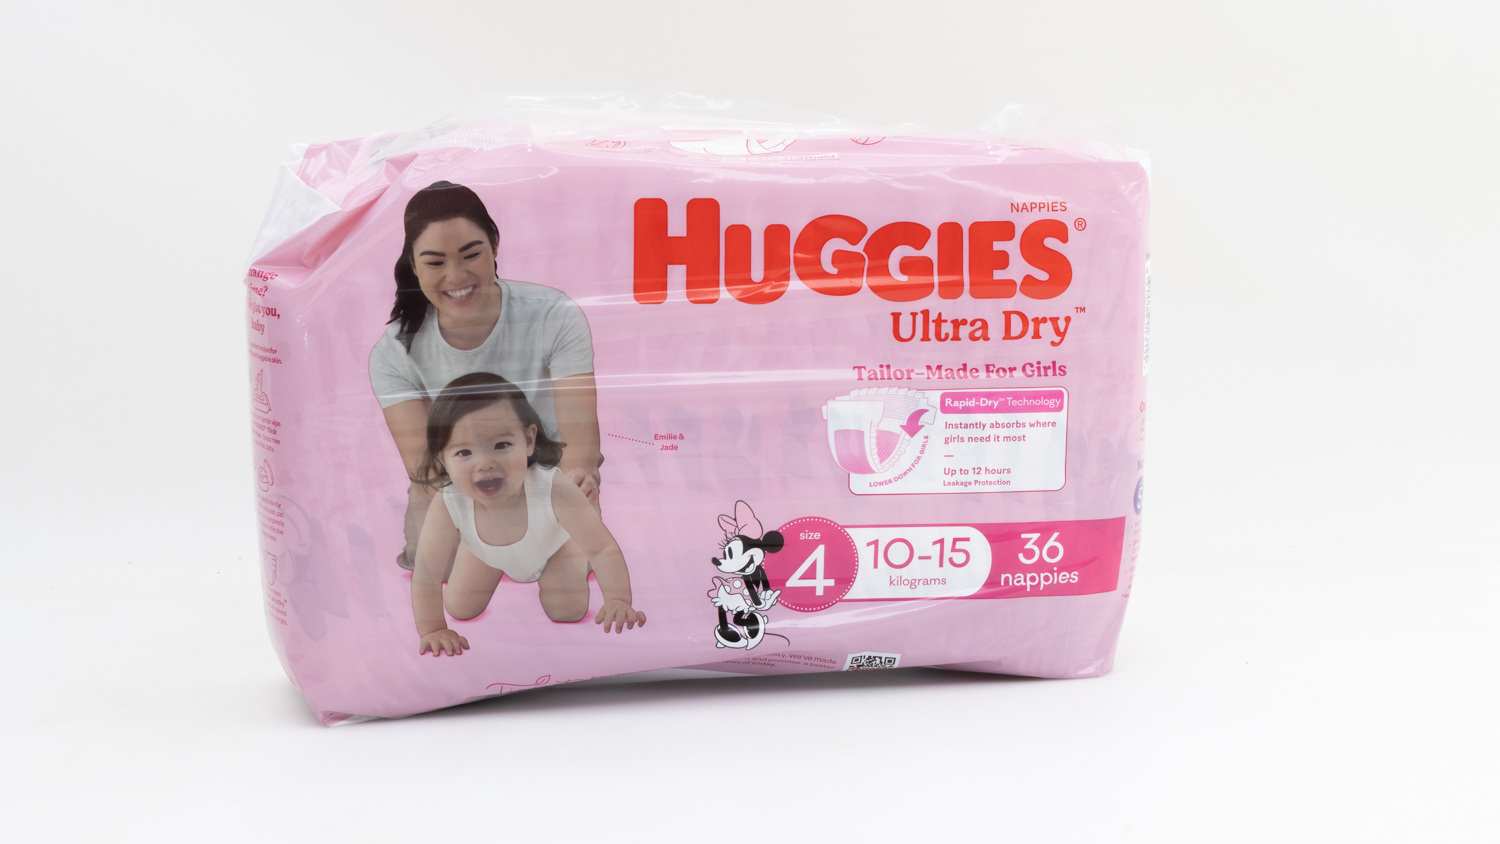 Huggies Ultra Dry Nappies for Girls Size 4 carousel image